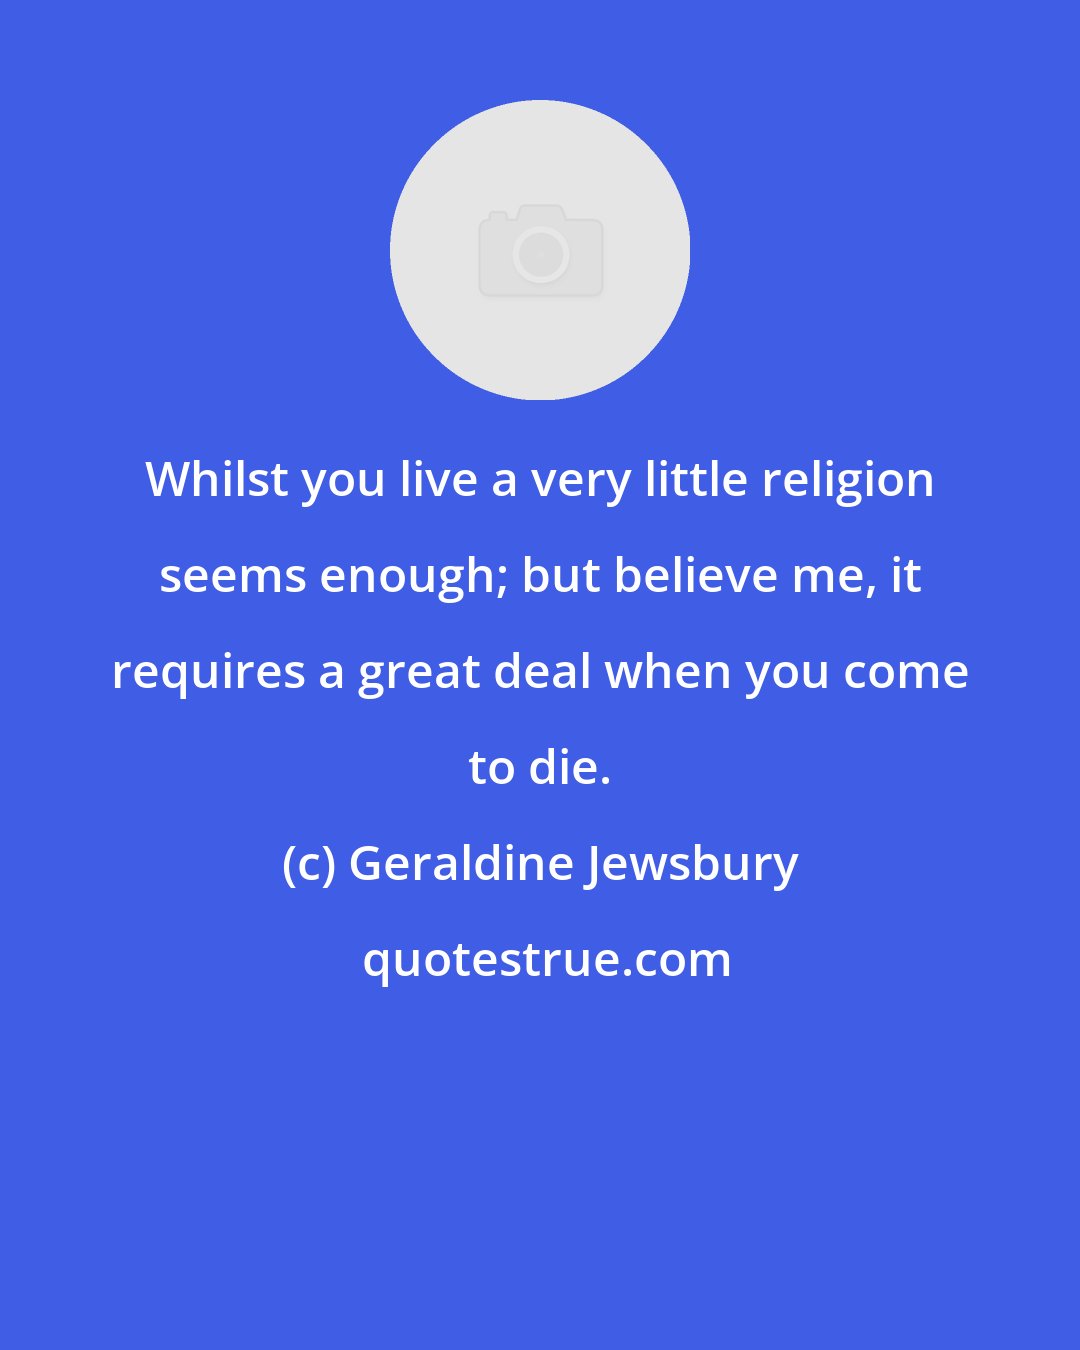 Geraldine Jewsbury: Whilst you live a very little religion seems enough; but believe me, it requires a great deal when you come to die.